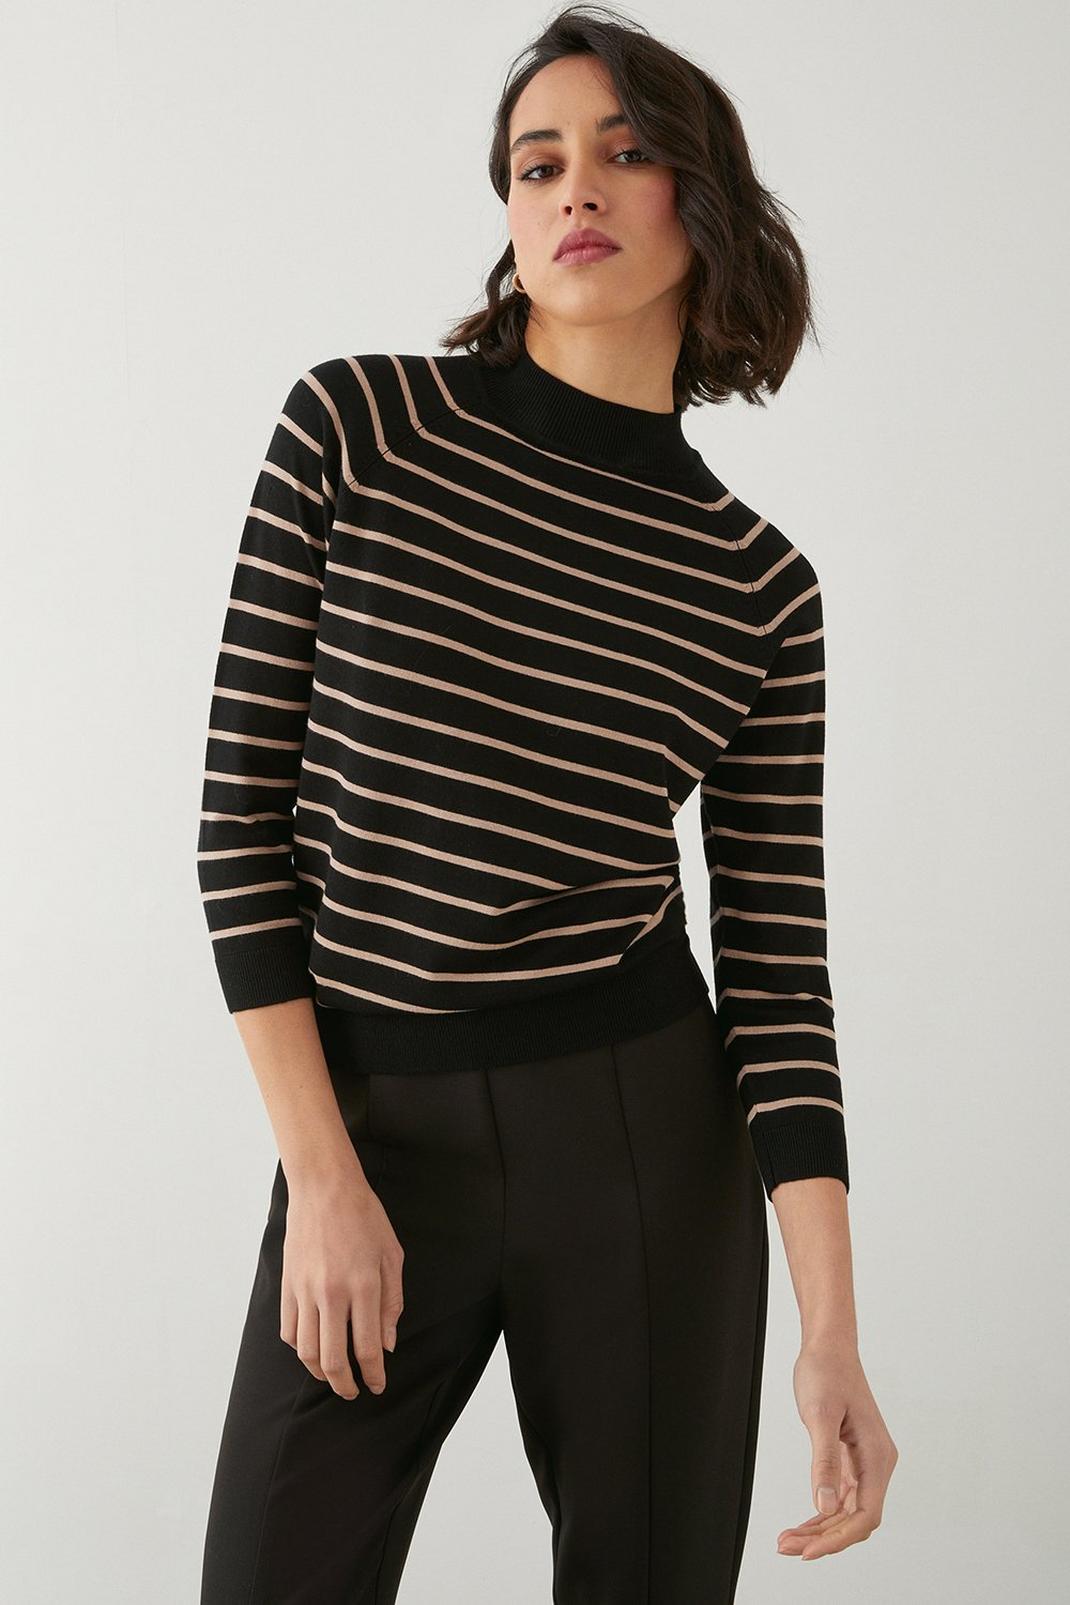 Black Tall Stripe 3/4 Sleeve High Neck Top image number 1